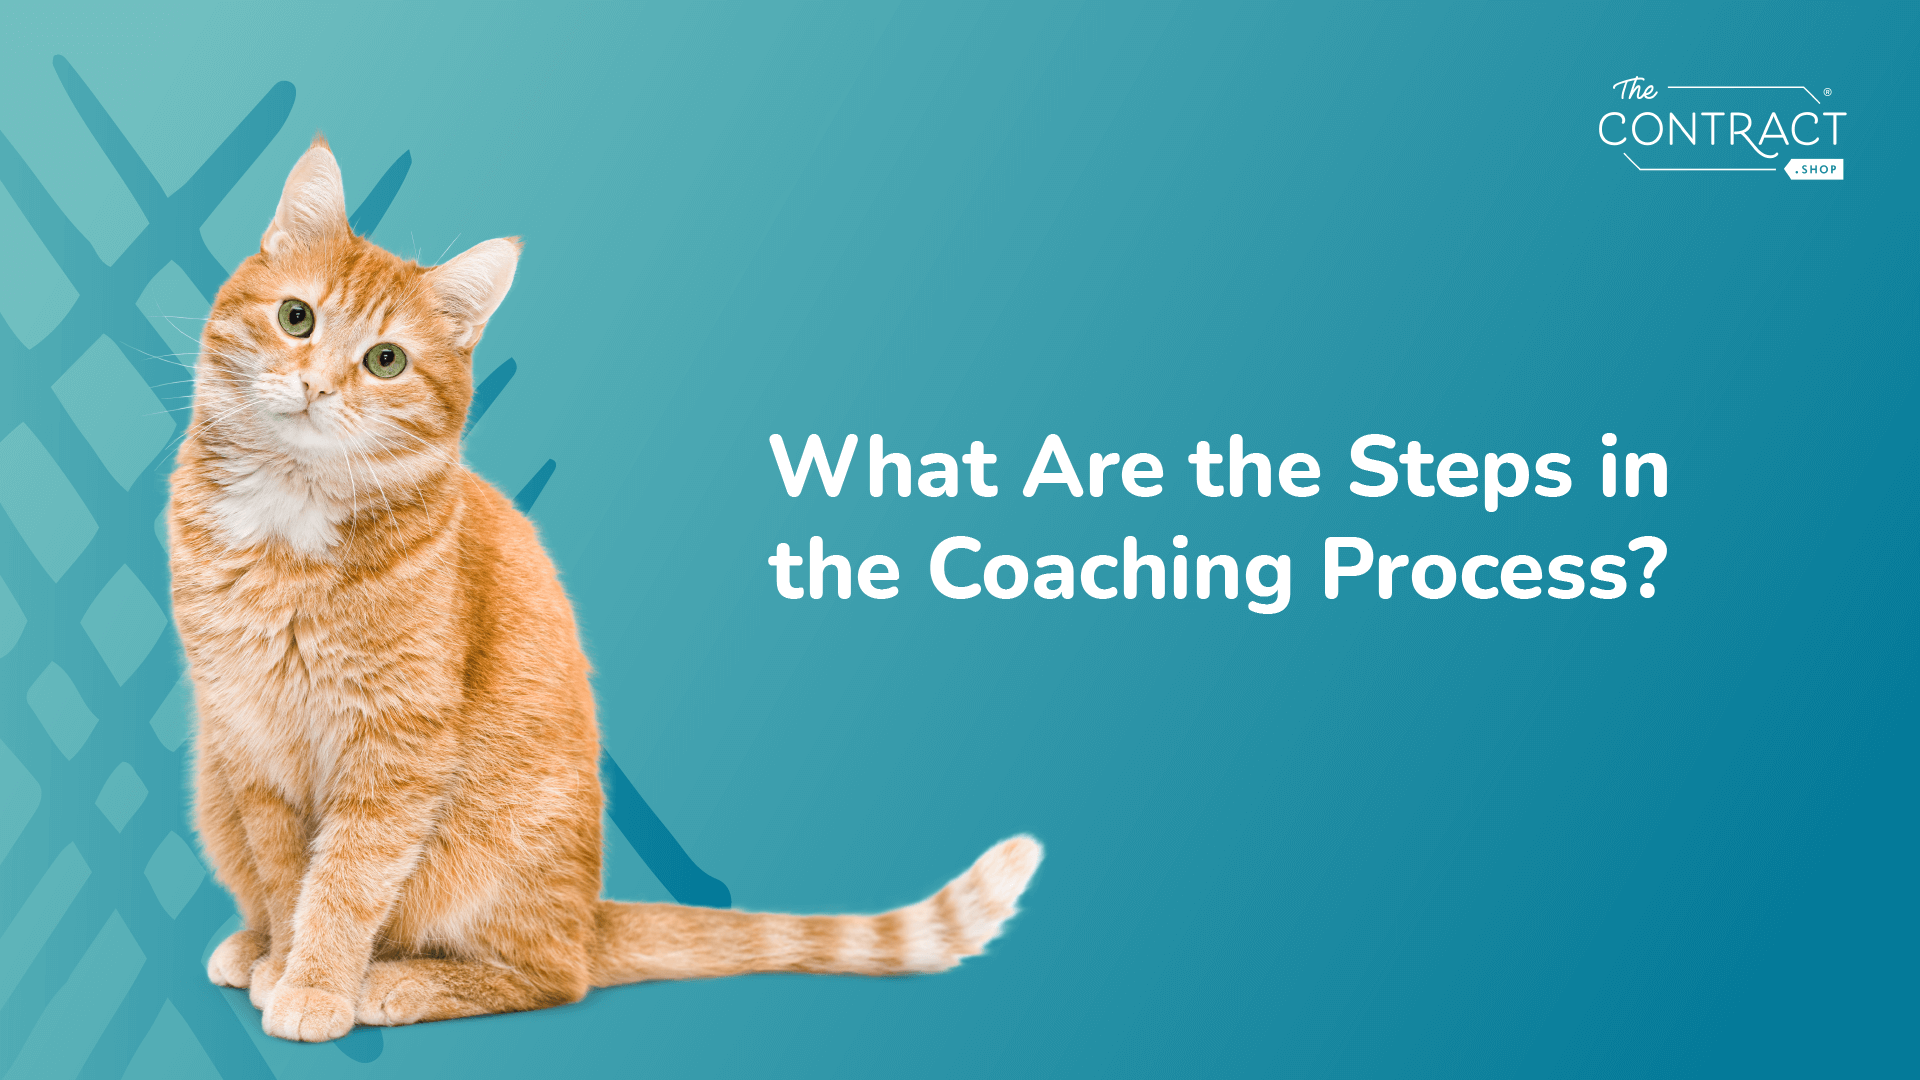 What Are the Steps in the Coaching Process?